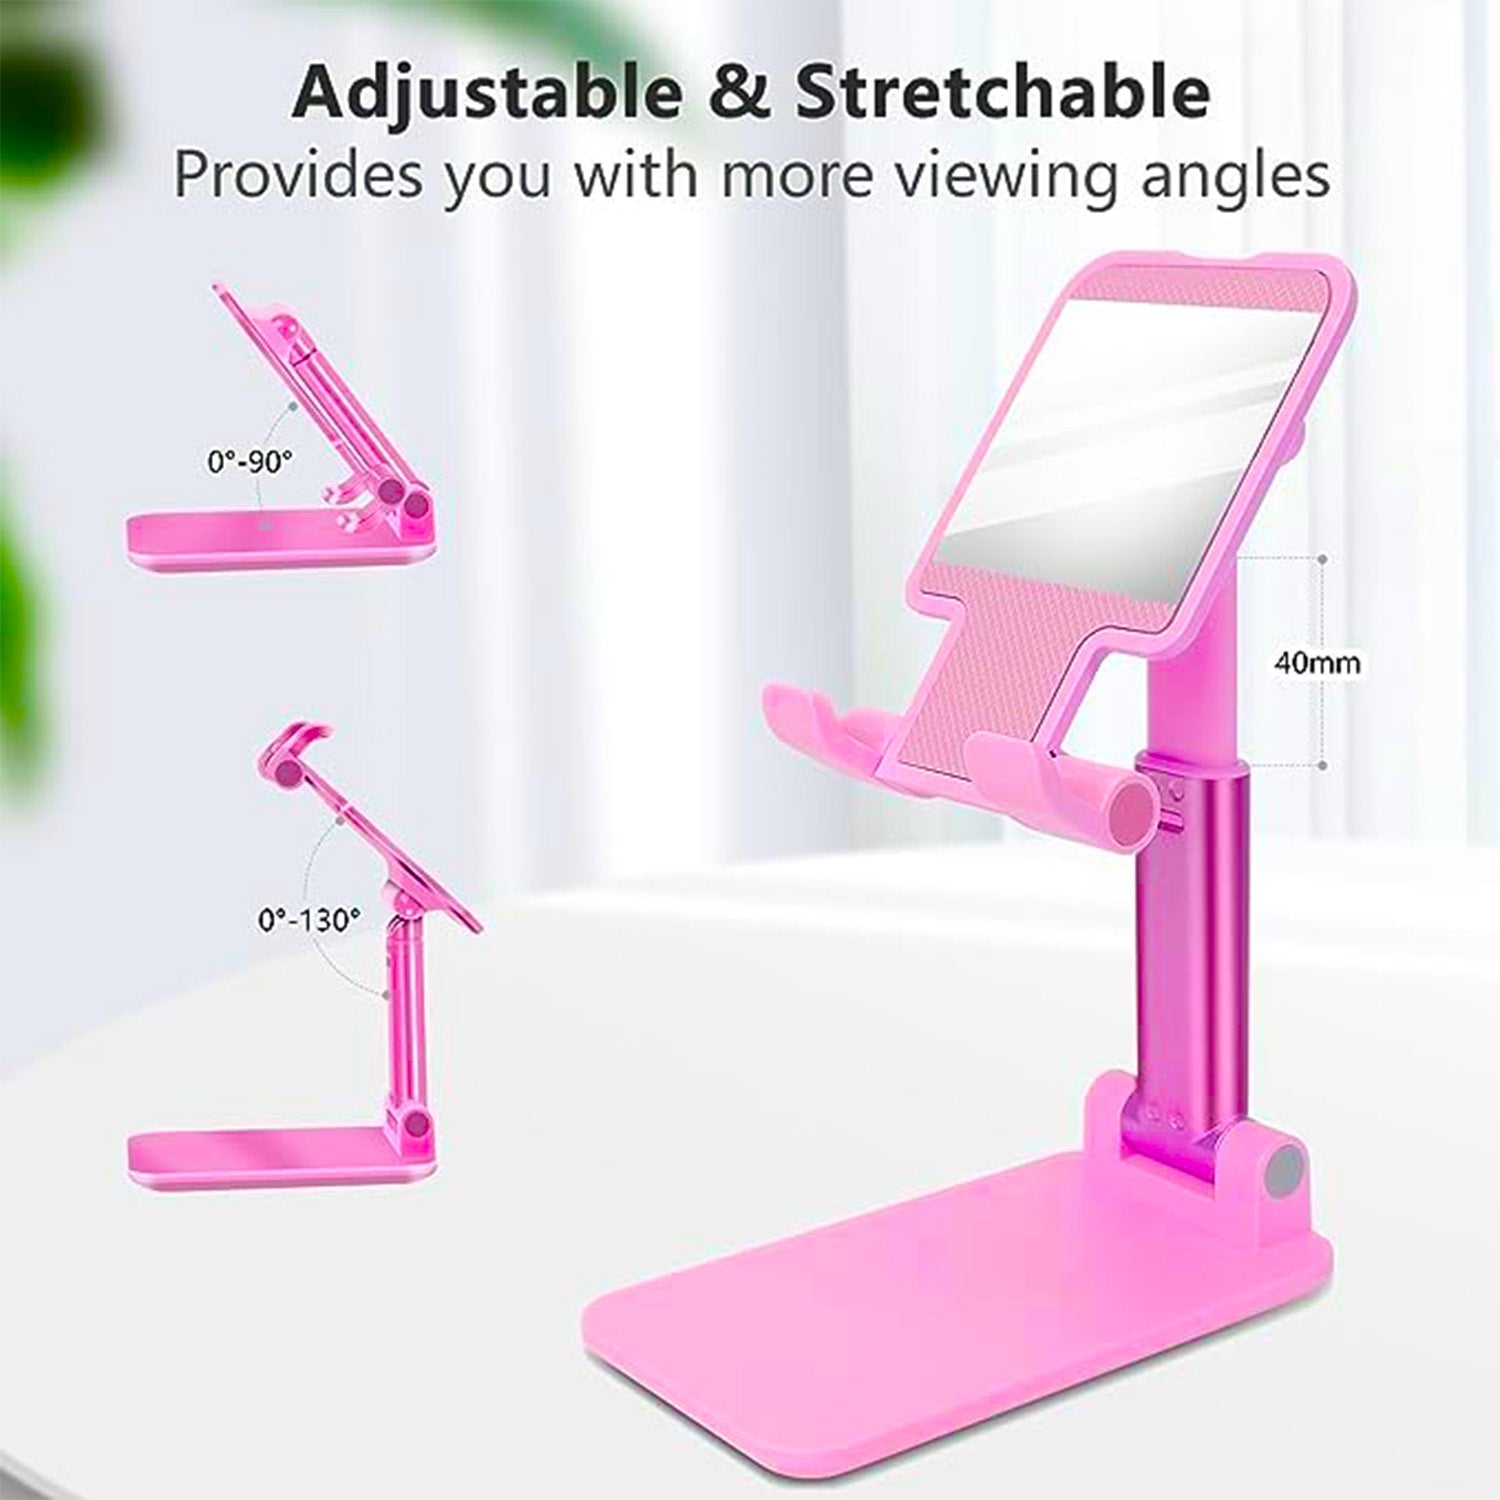 3-Way Adjustable Phone Stand with Mirror for Desktop Organization